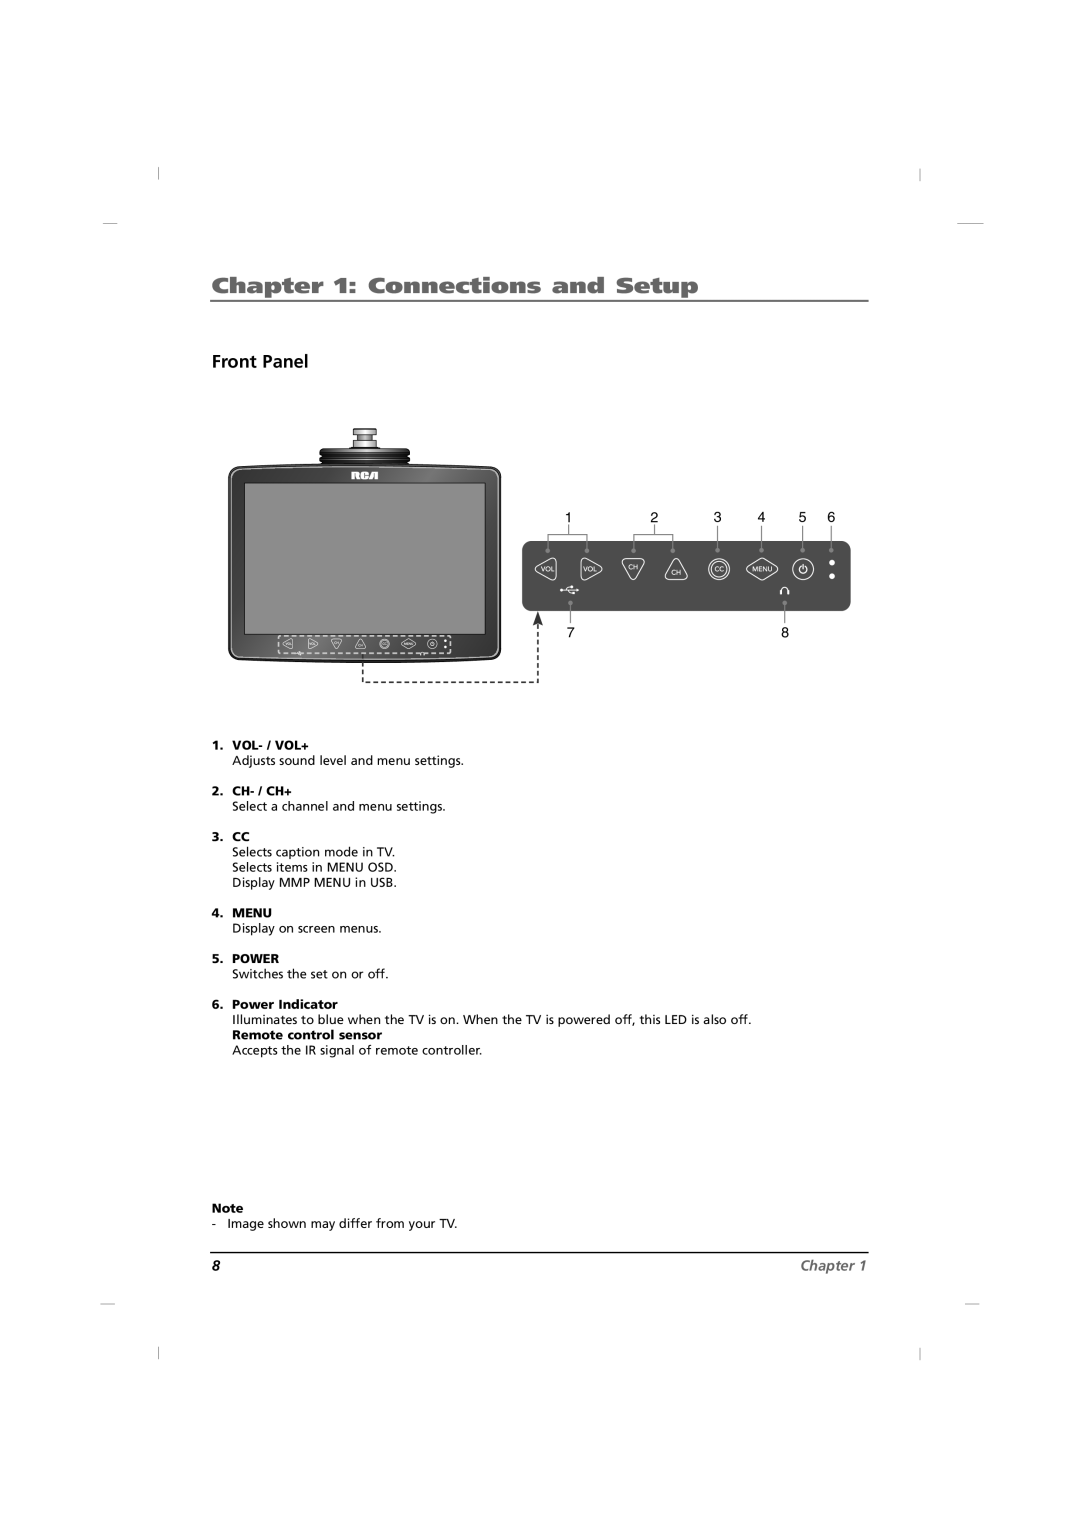 RCA J12H770 manual Connections and Setup, Front Panel, Chapter 